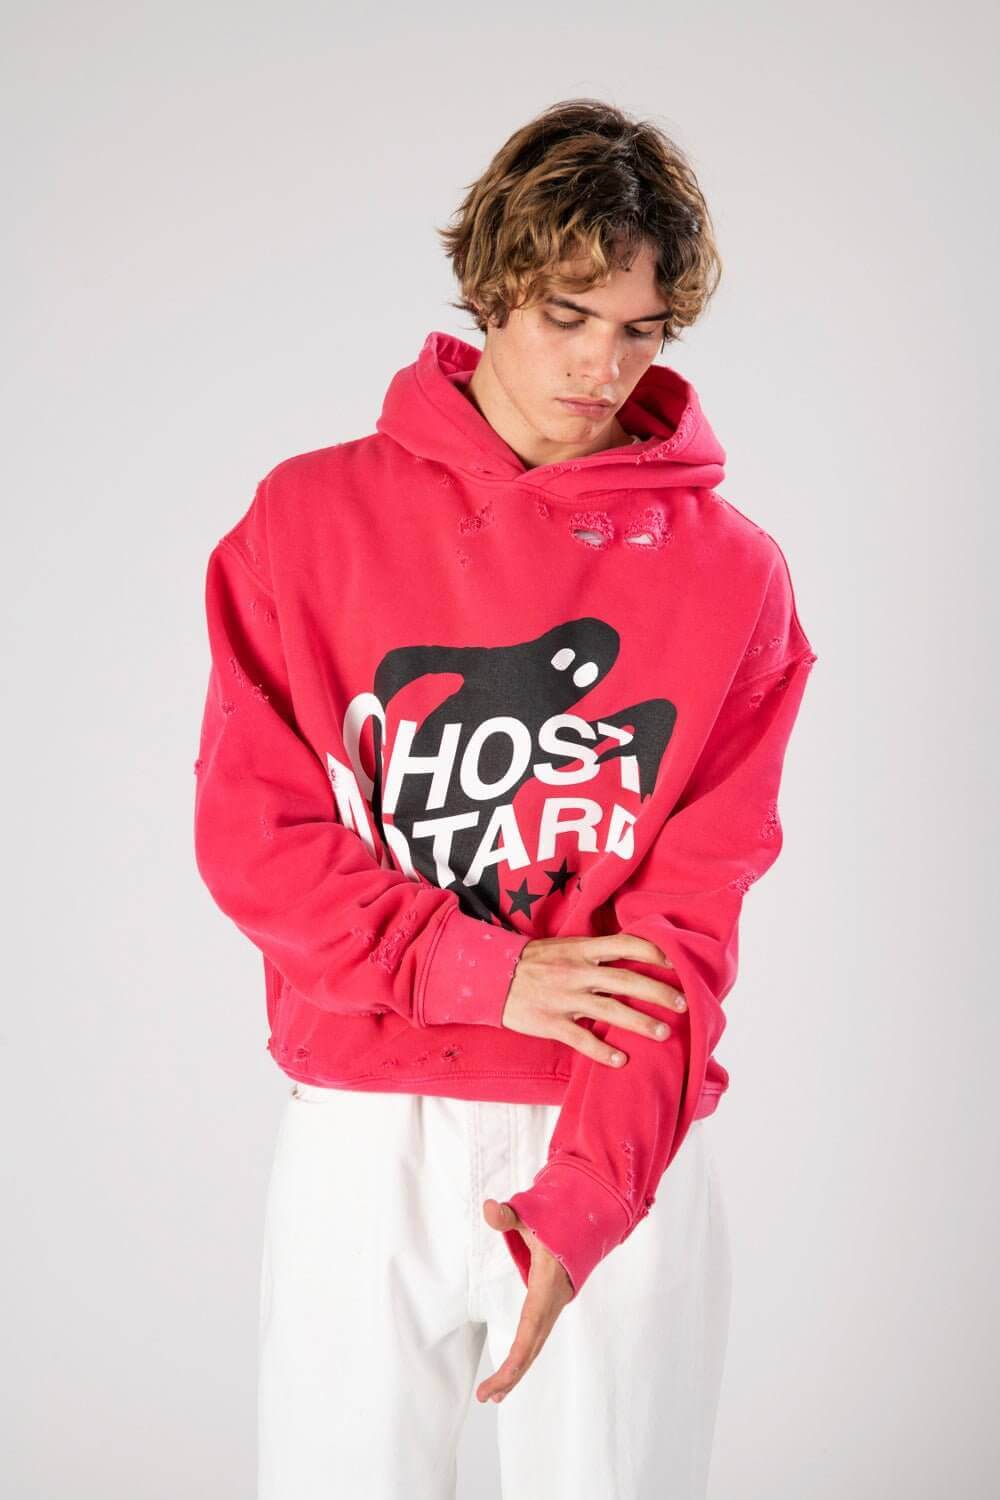 GHOST MOTARD HOODIE Hooded sweater printed on the front. Regular fit. HTC LOS ANGELES